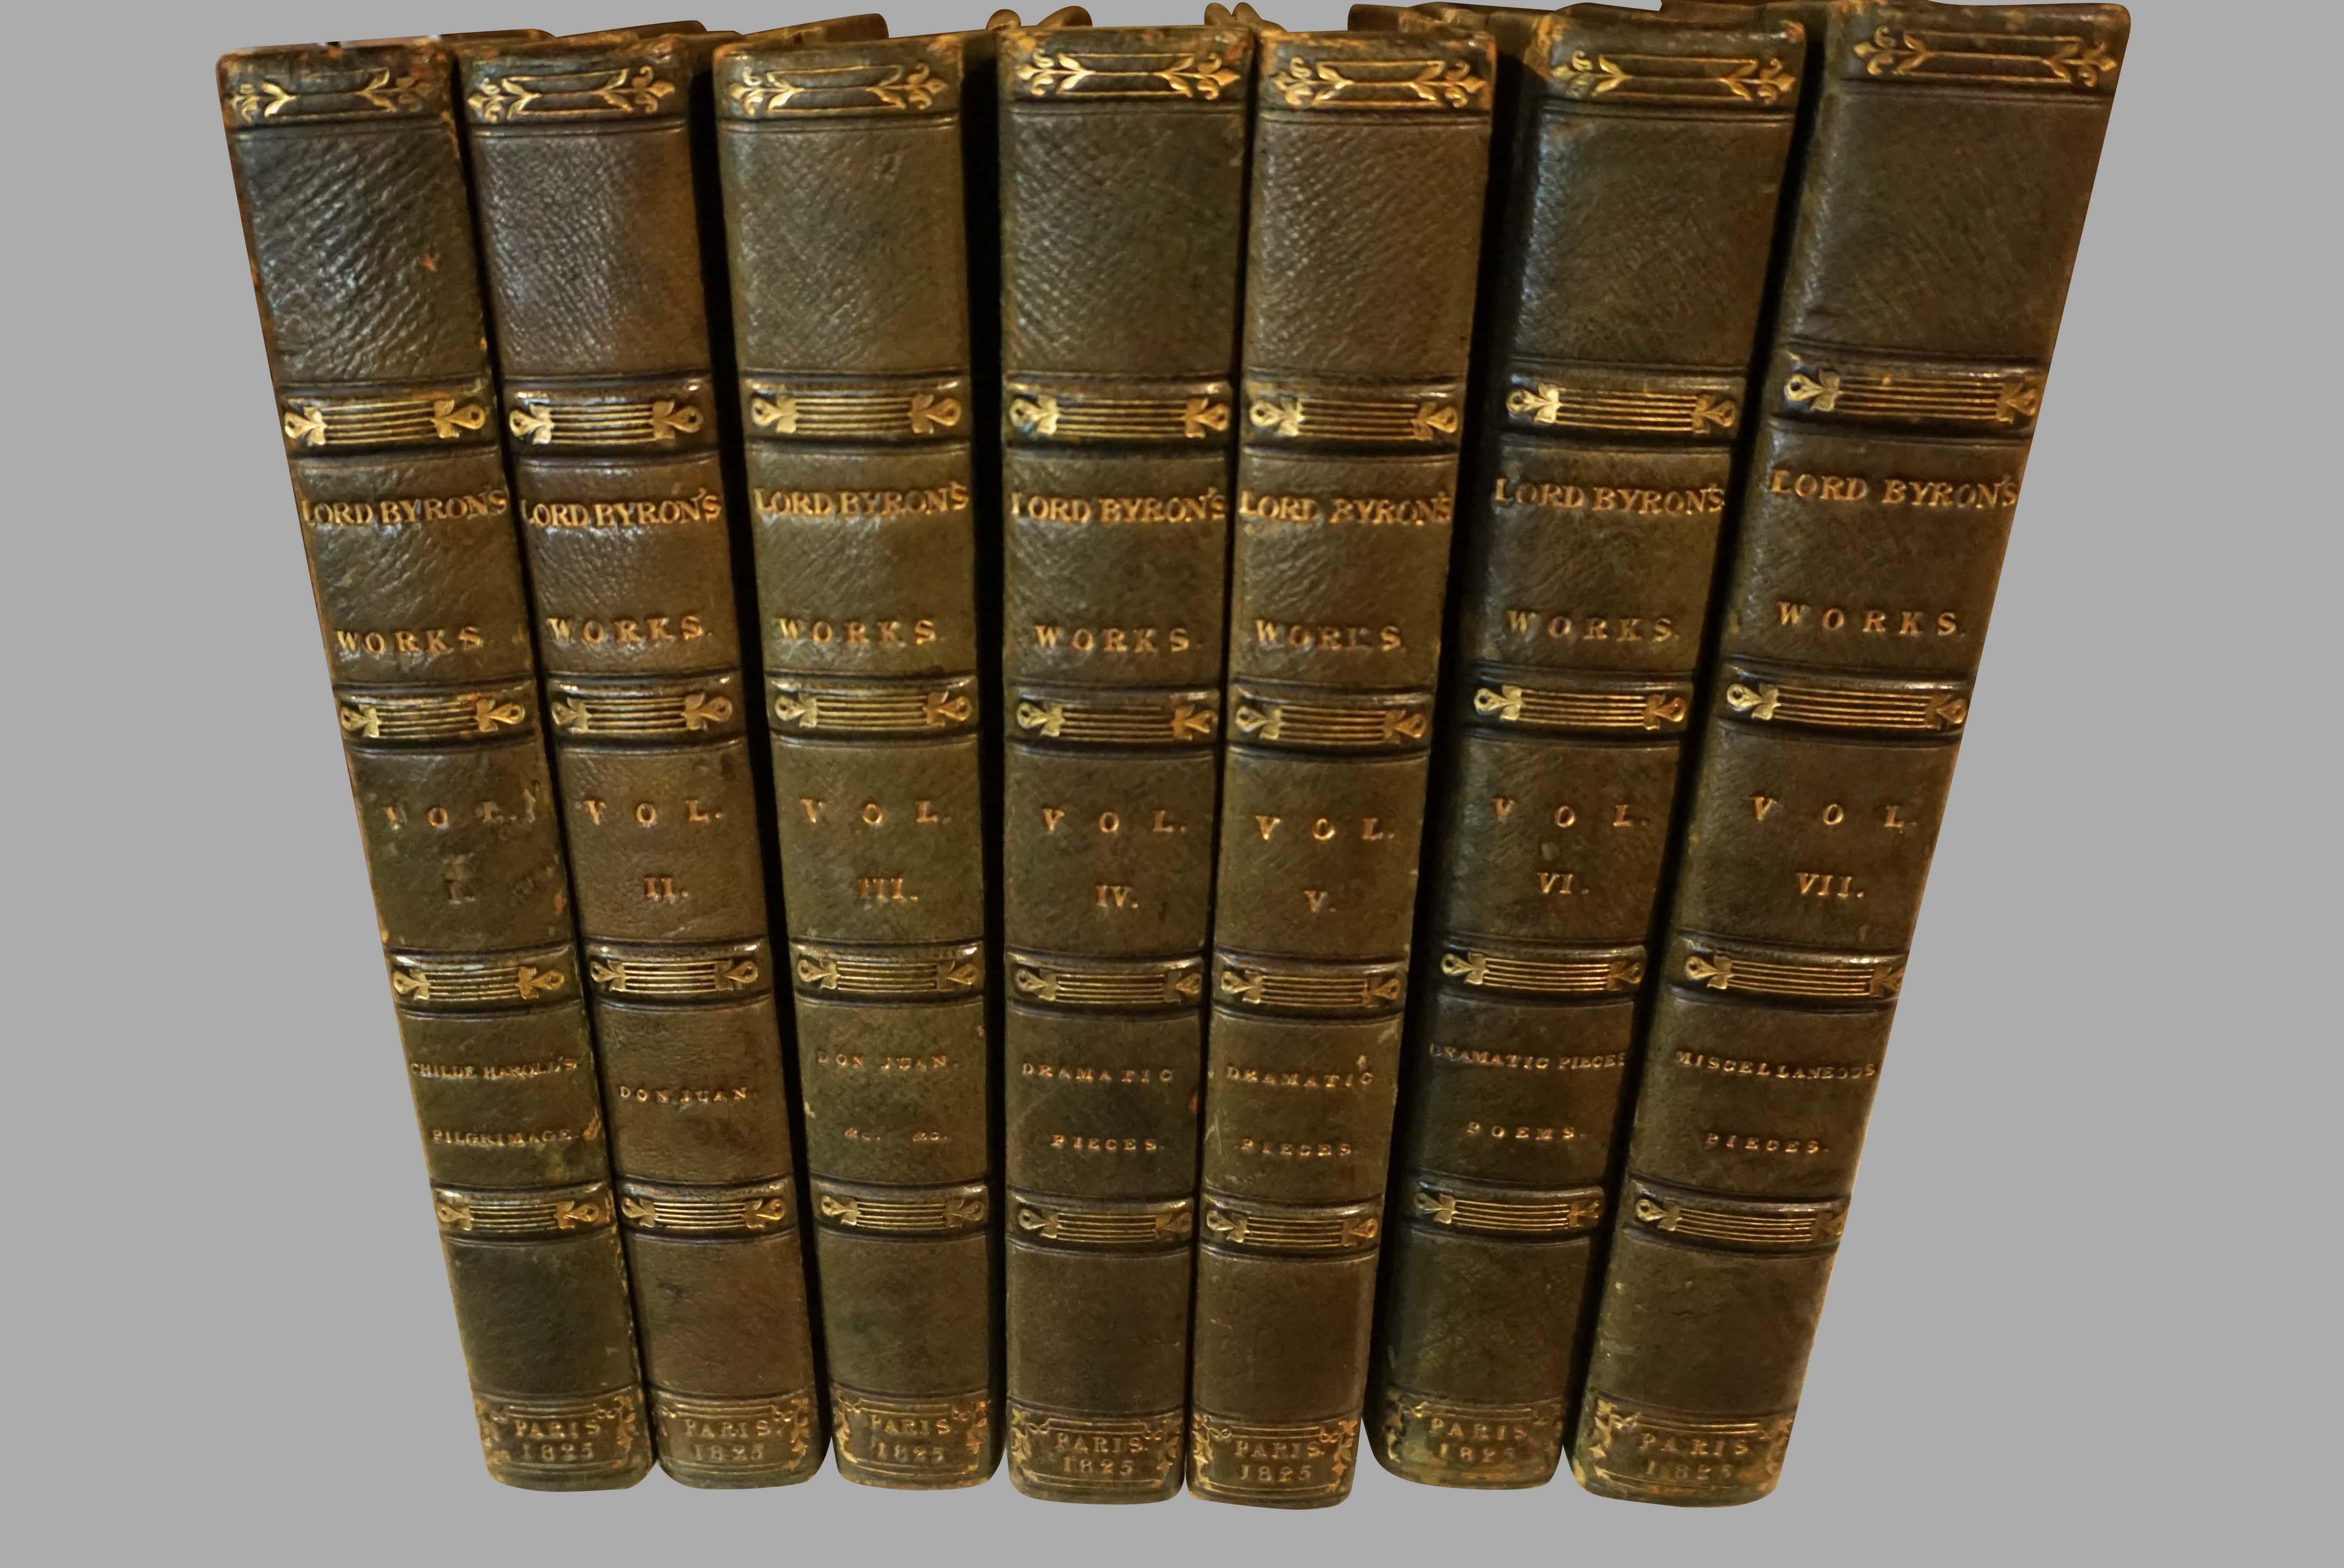 An attractive set of the complete works of Lord Byron in 7 half green morocco leather bindings with gilt lettering and tooling on raised leather bands. Endpapers and covers finished in marbleized paper. Published in Paris, 1825 by Baudry.